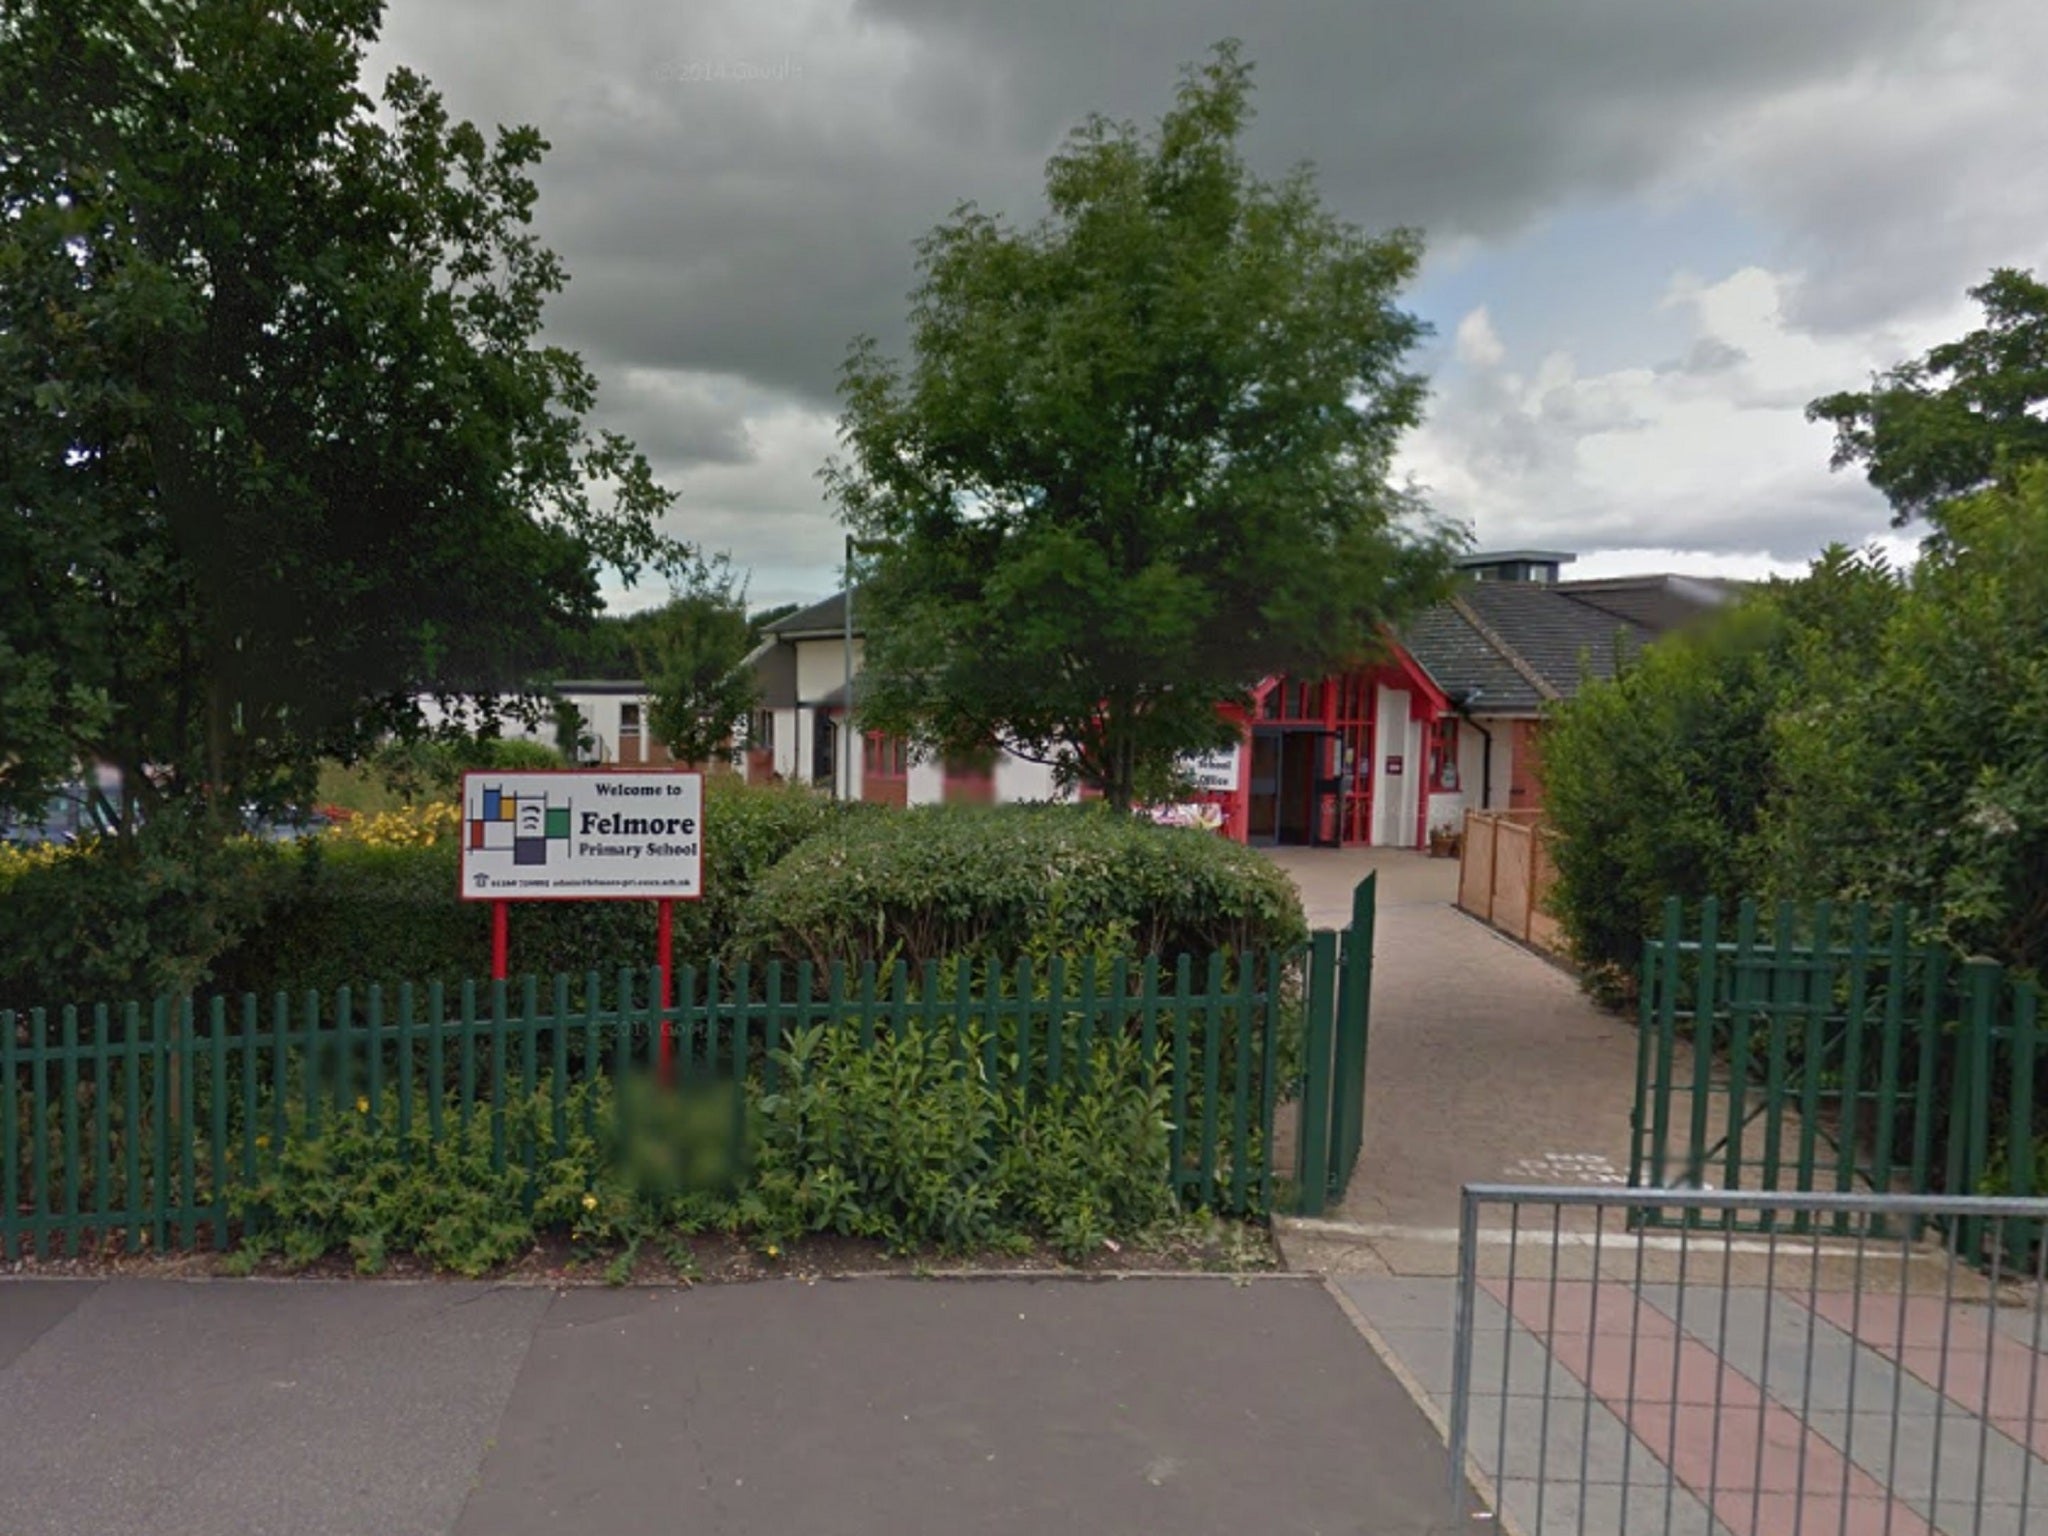 Parents of children attending Felmore Primary School in Basildon, Essex, have been told off for smoking and swearing outside the gates